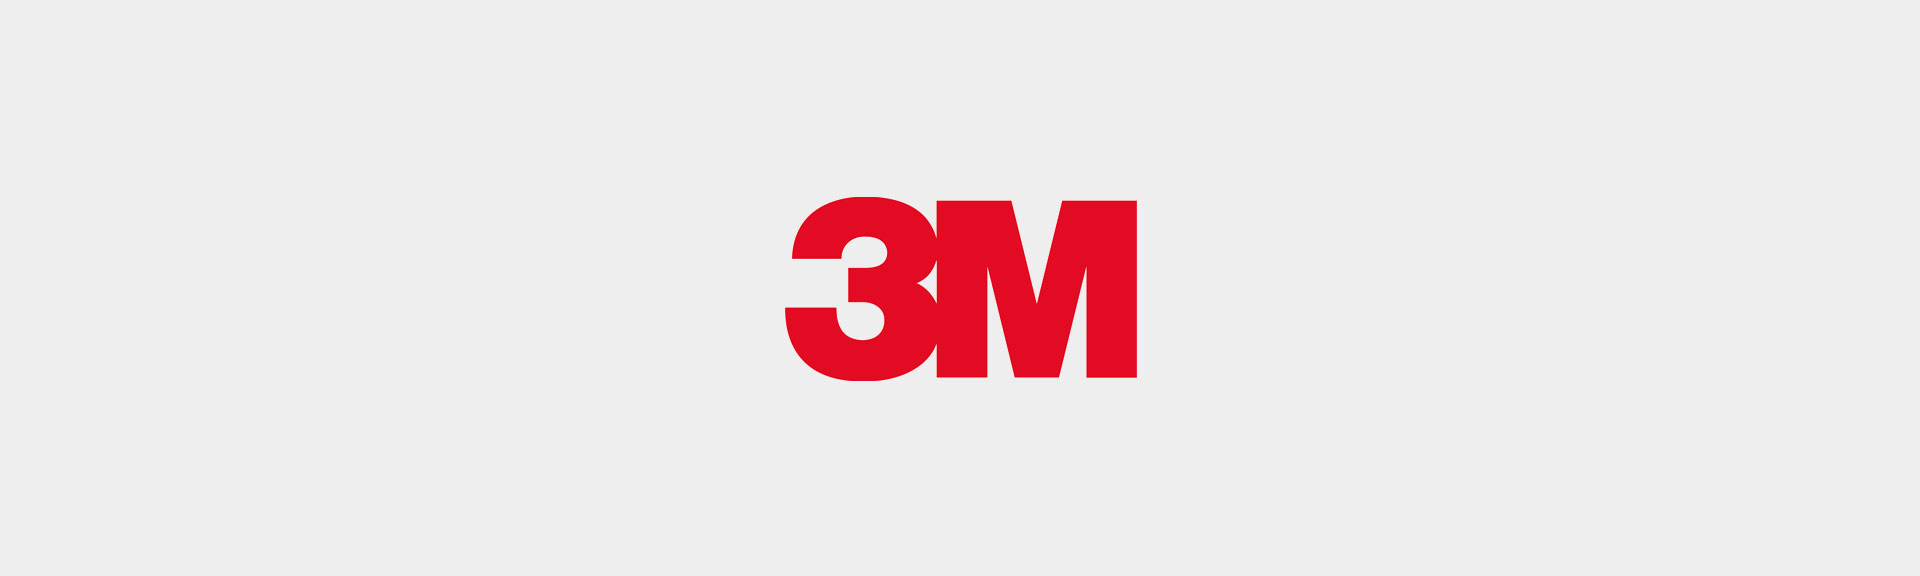 Ansini sticking with 3M TM Tapes